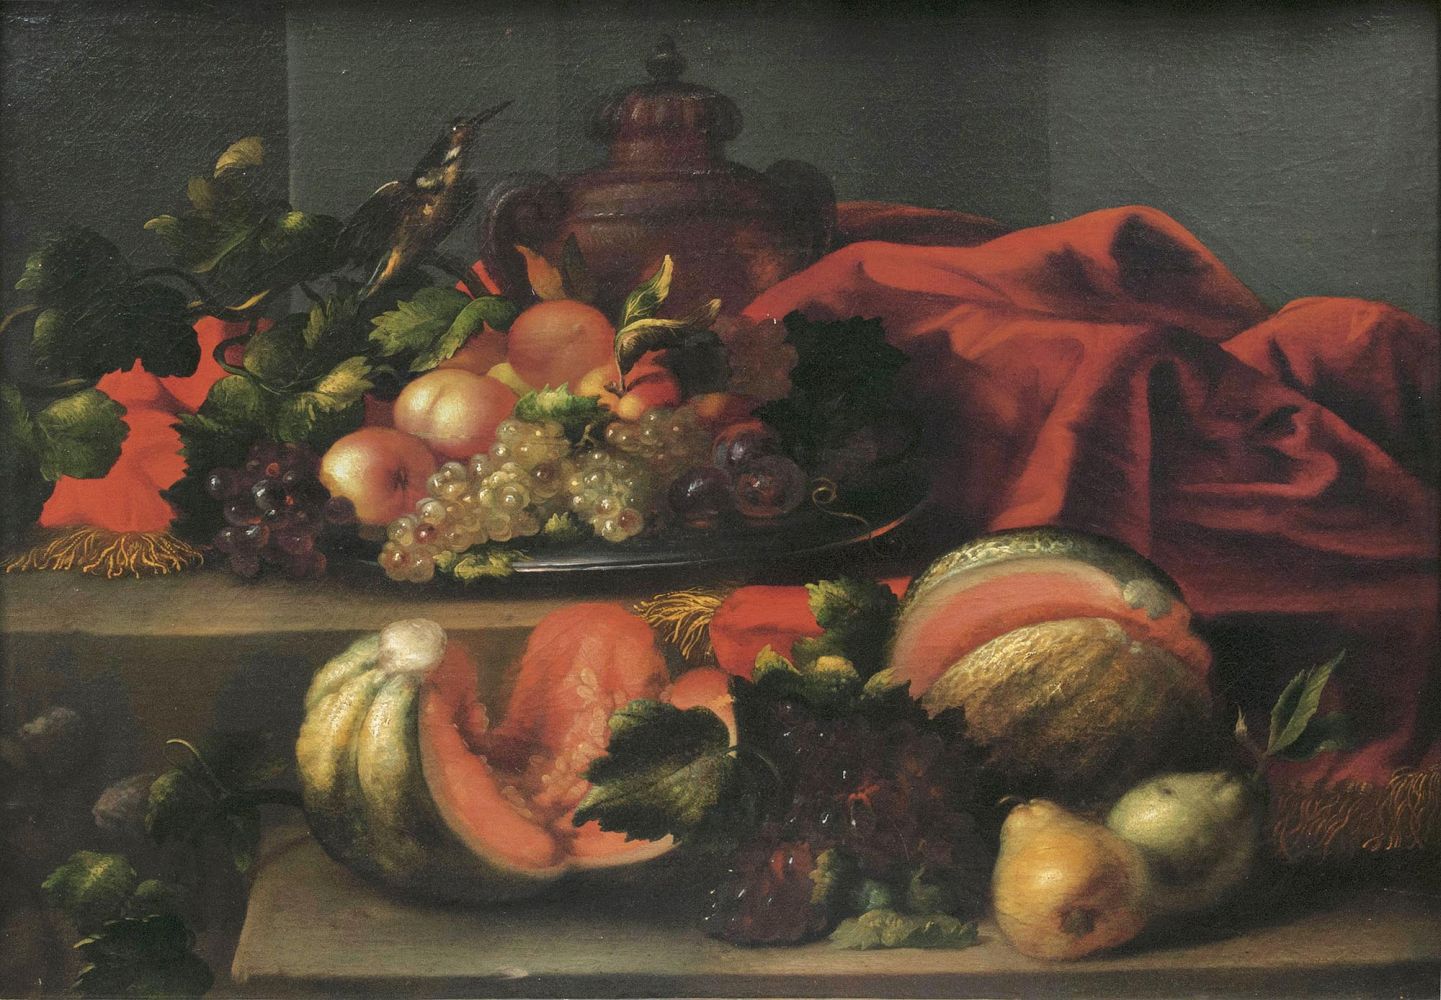 Still Life with Fruits, a Kingfisher and a Vase